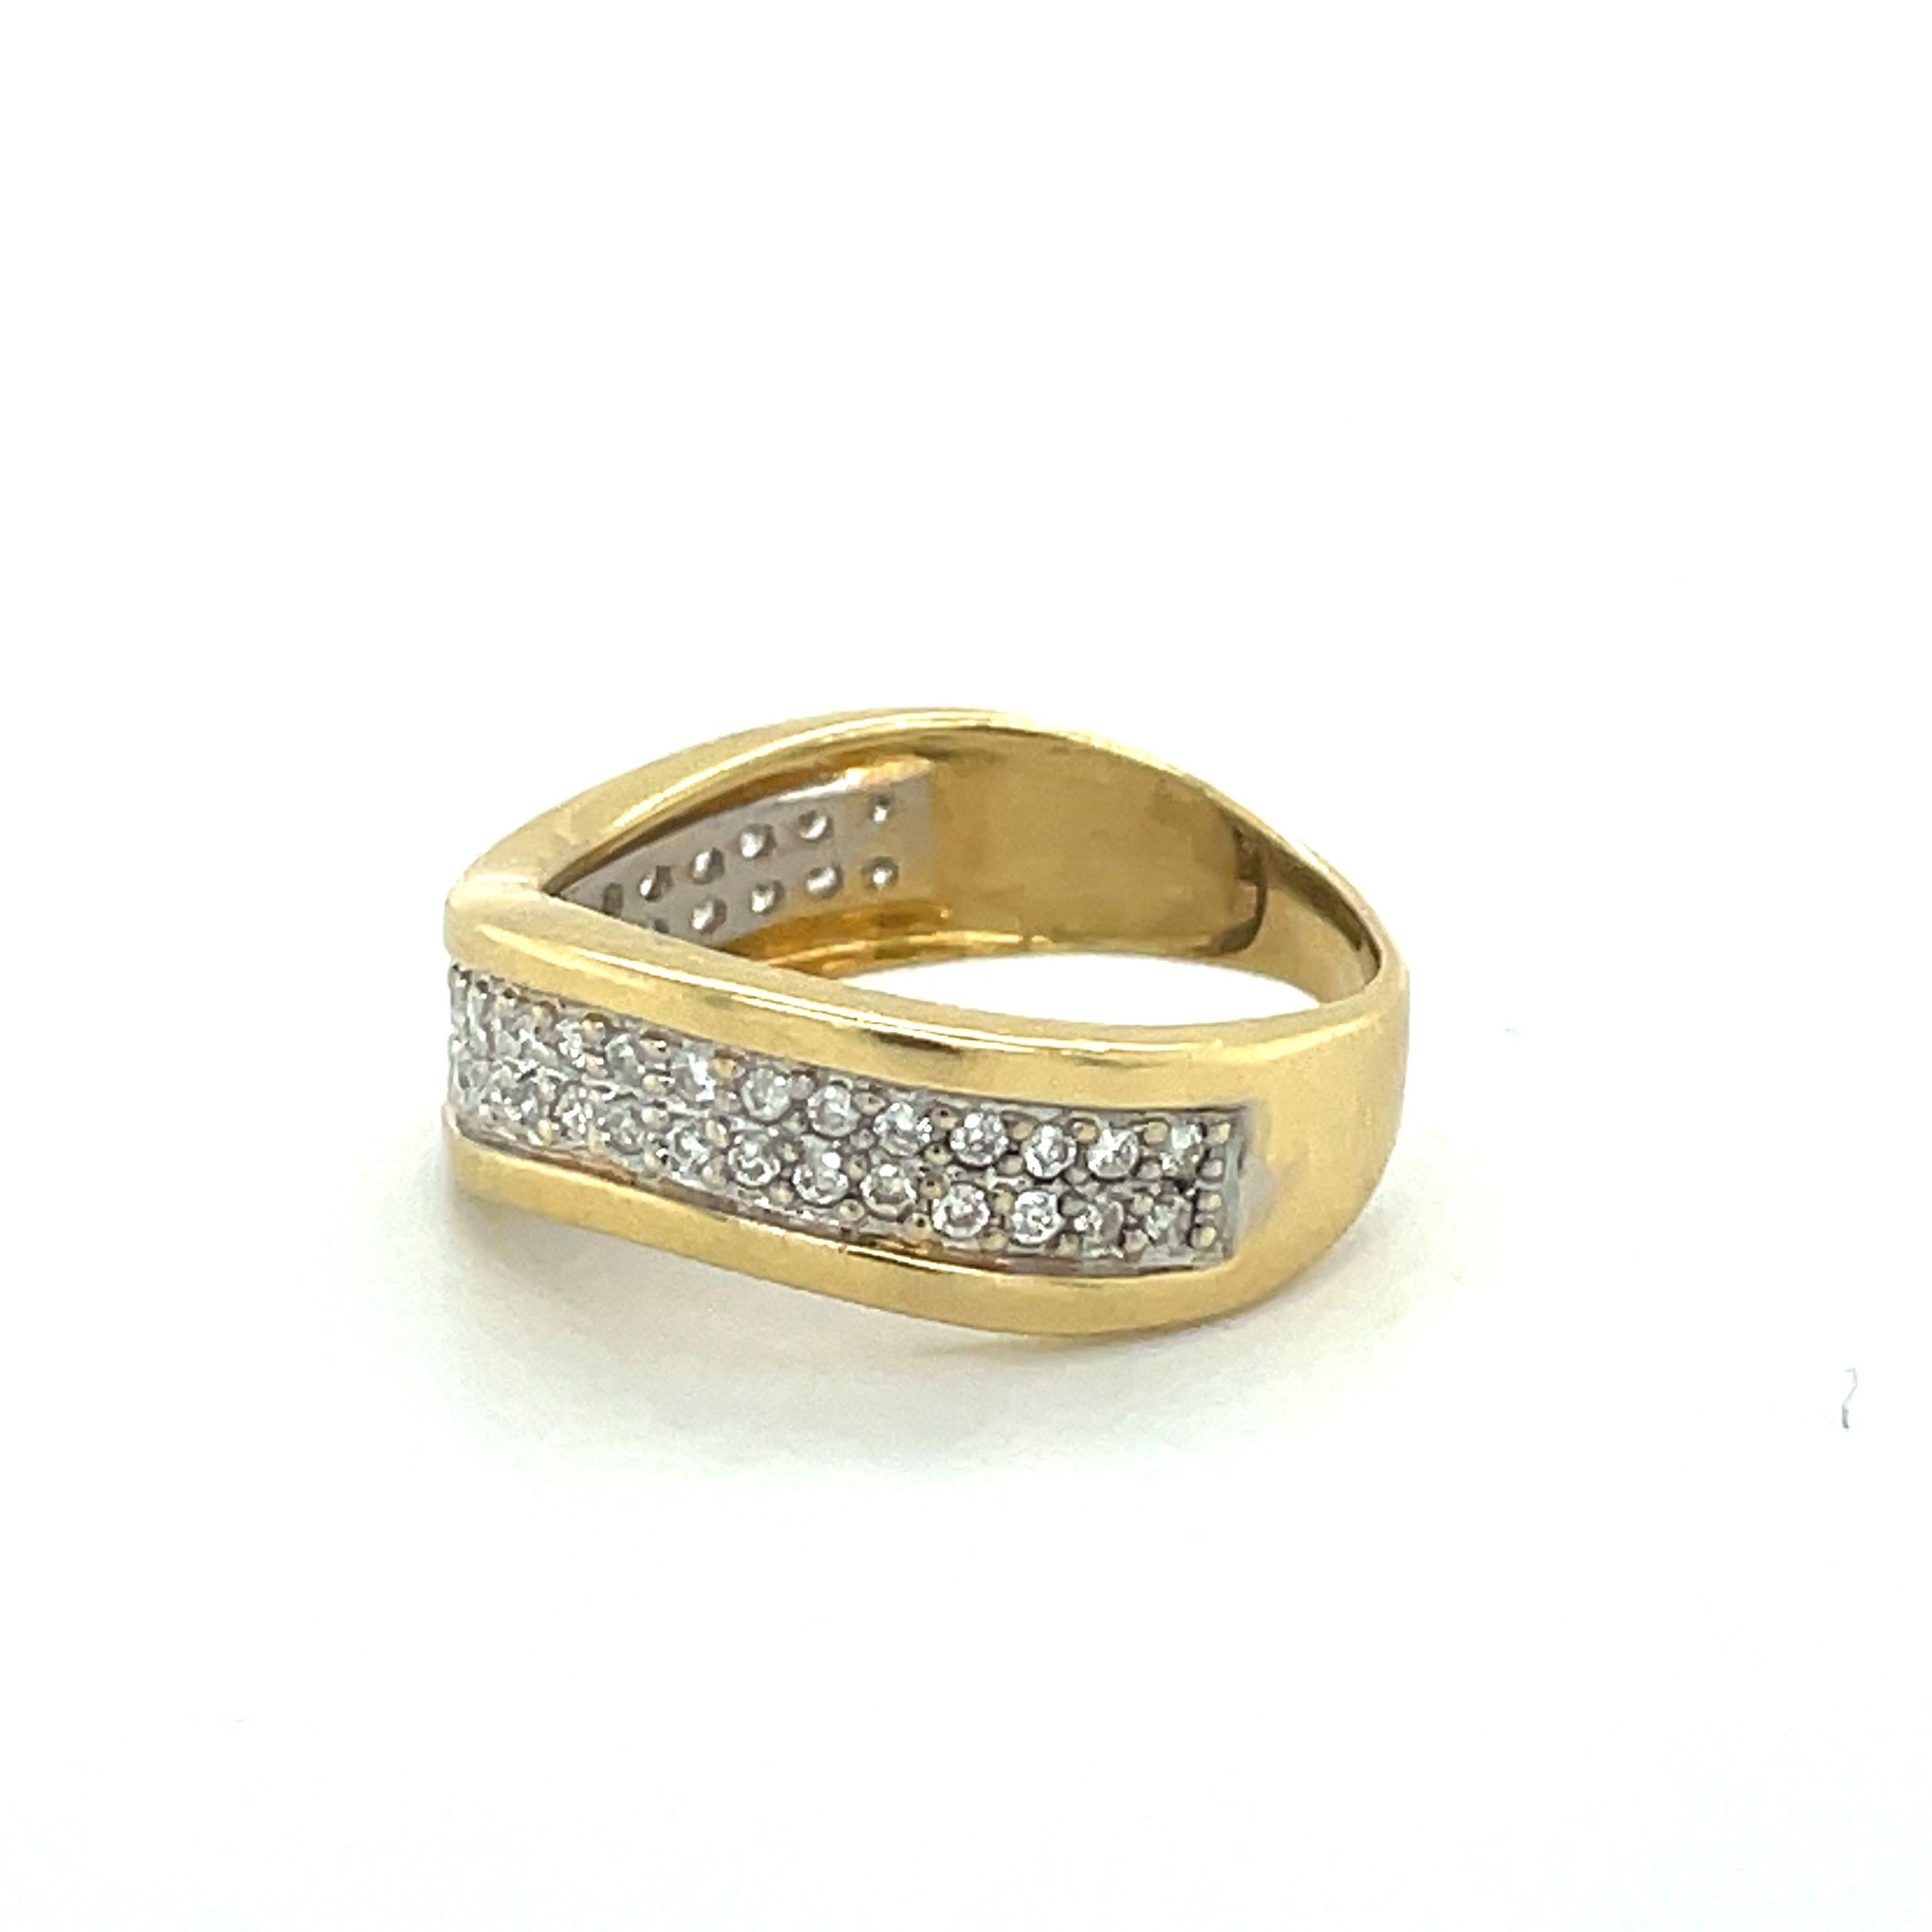 Vintage Gold Wave Band, 0.25CT Diamond, 18k Yellow Gold ring, weddding band ring For Sale 2